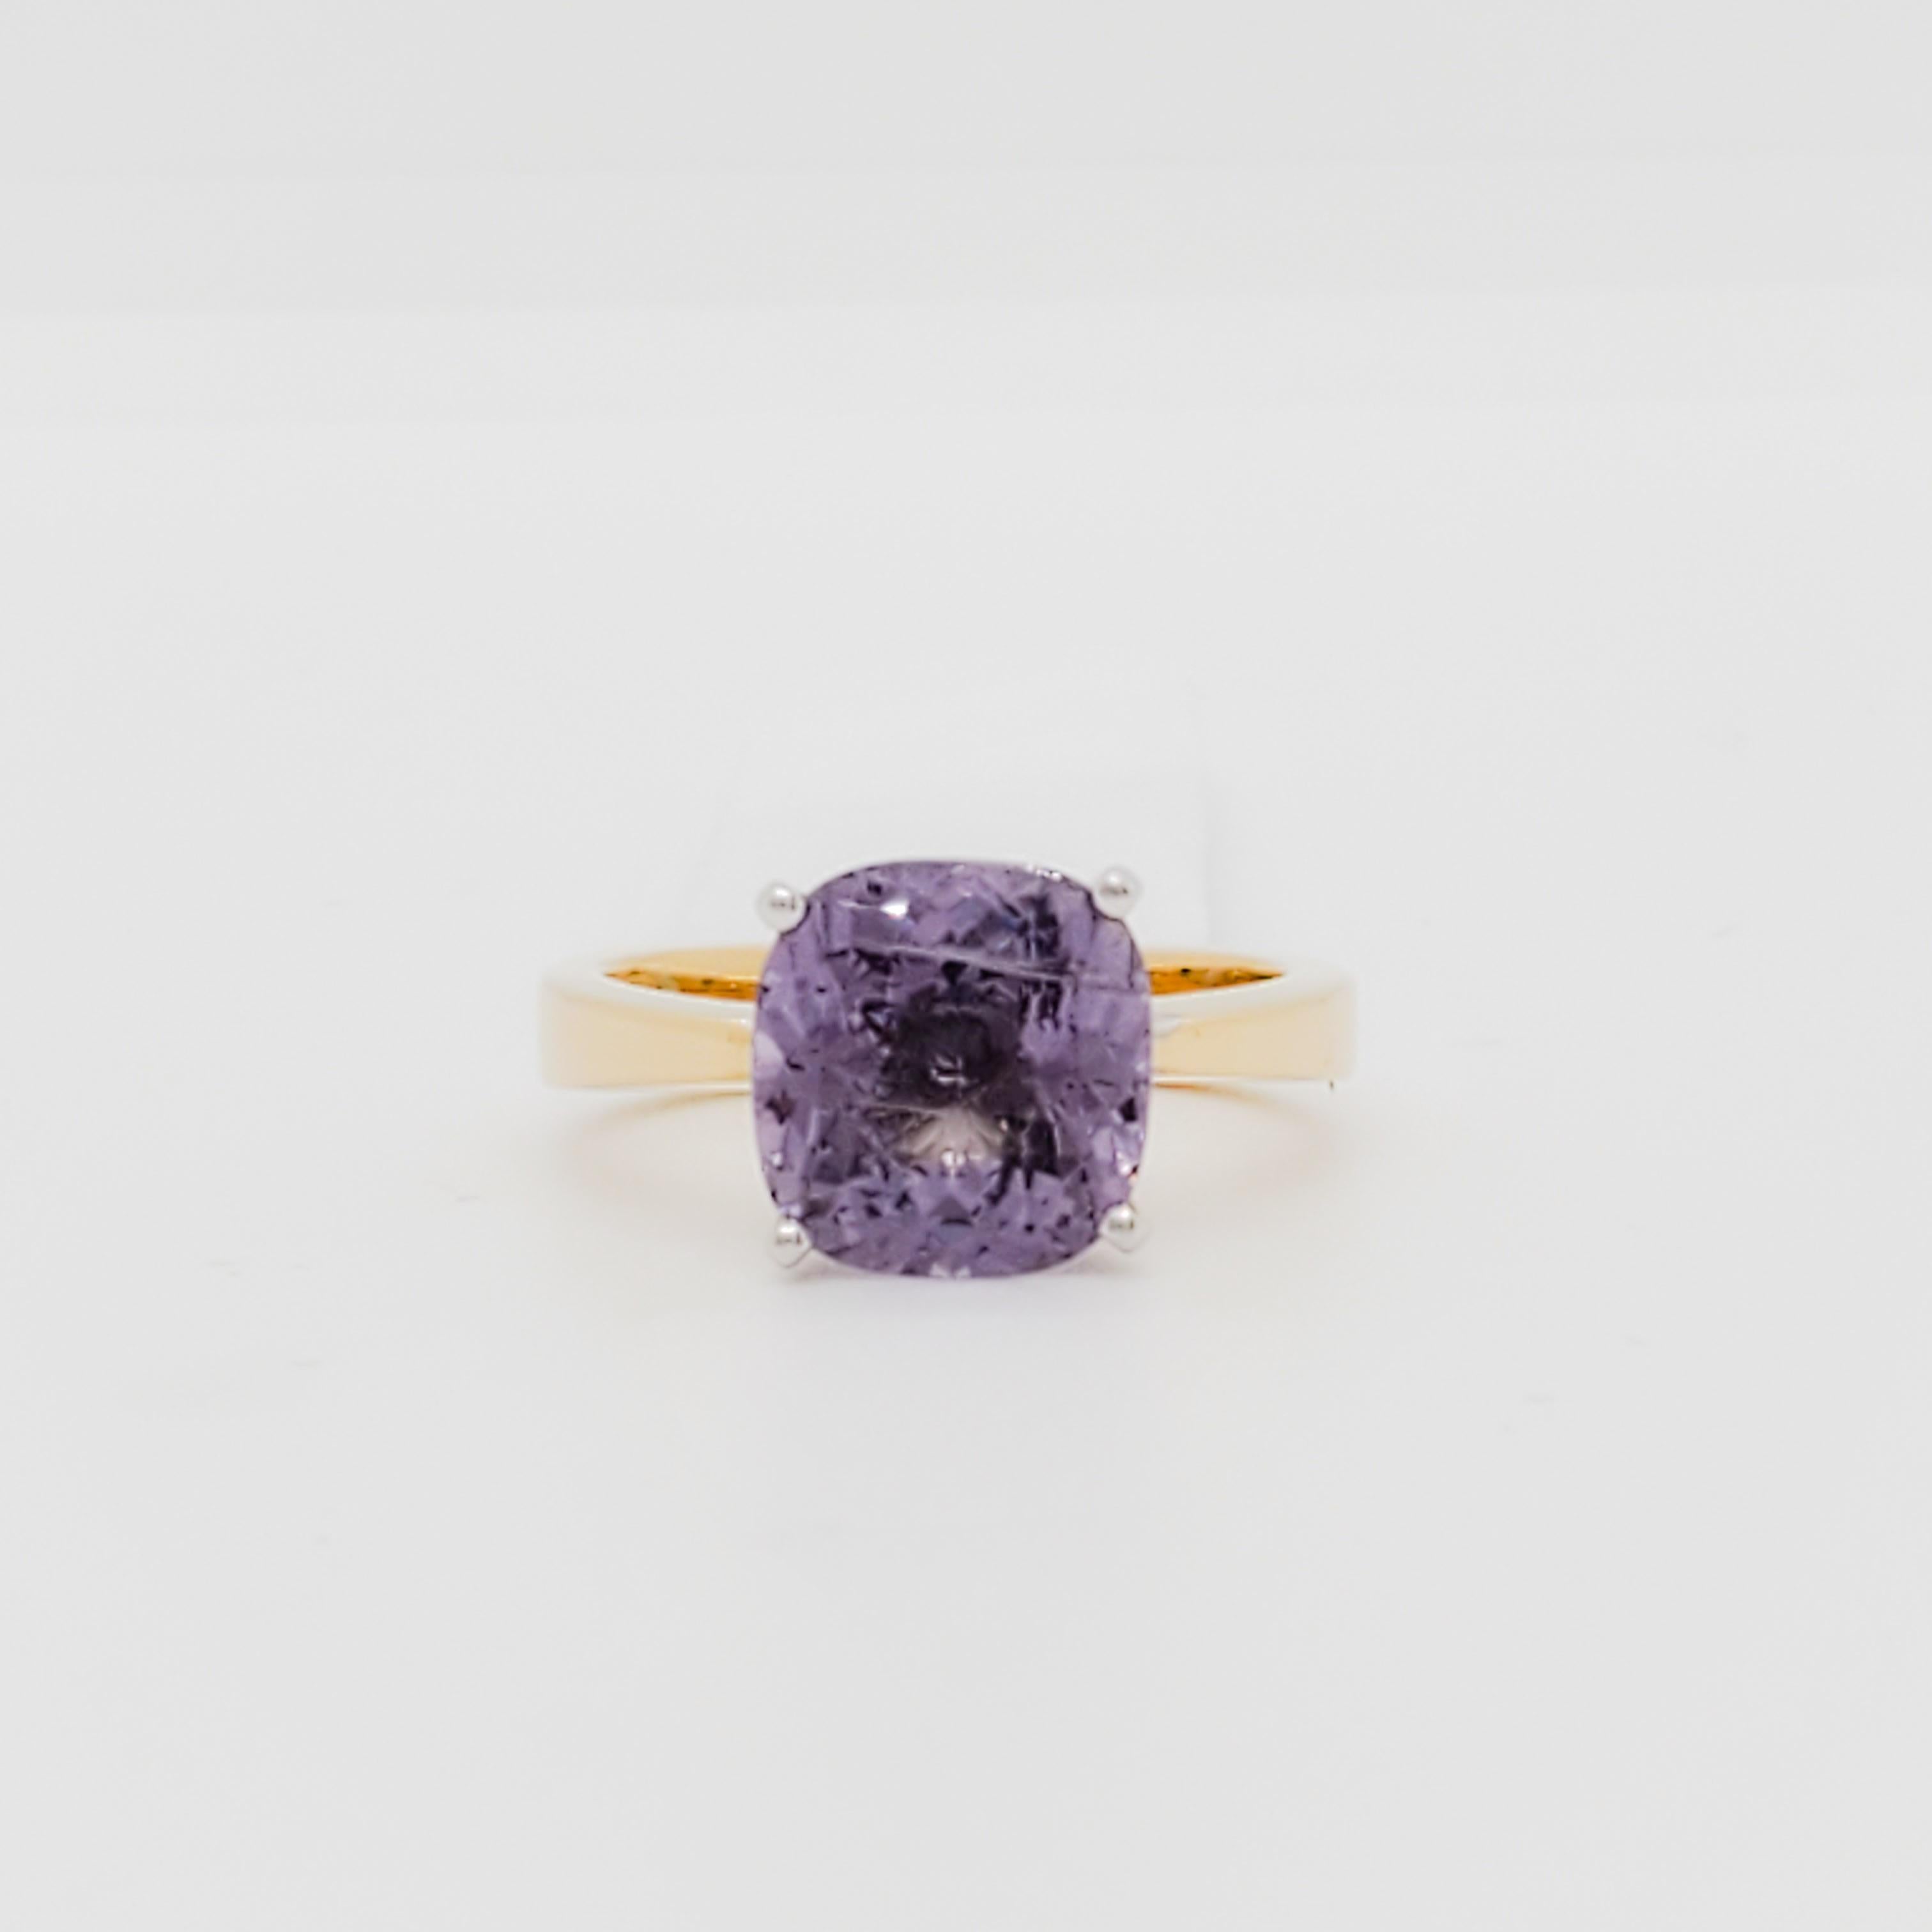 Beautiful 4.30 ct. purple spinel cushion in a handmade 14k yellow gold mounting.  Ring size 7.5.